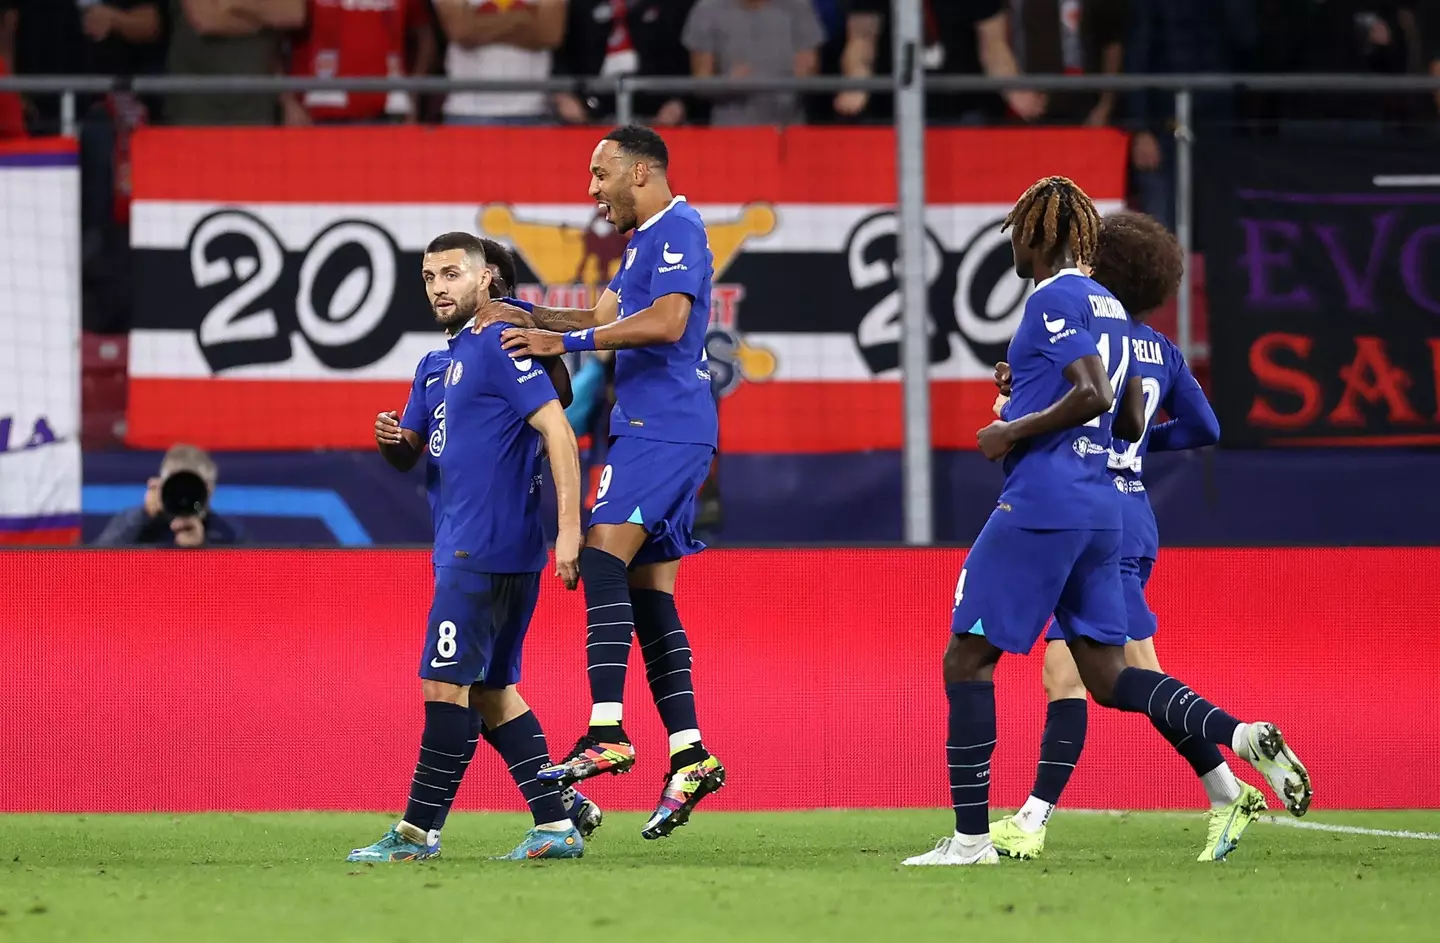 Chelsea's Mateo Kovacic (left) celebrates scoring their side's first goal of the game with team-mates during the UEFA Champions League group E match at the Red Bull Arena. (Alamy)